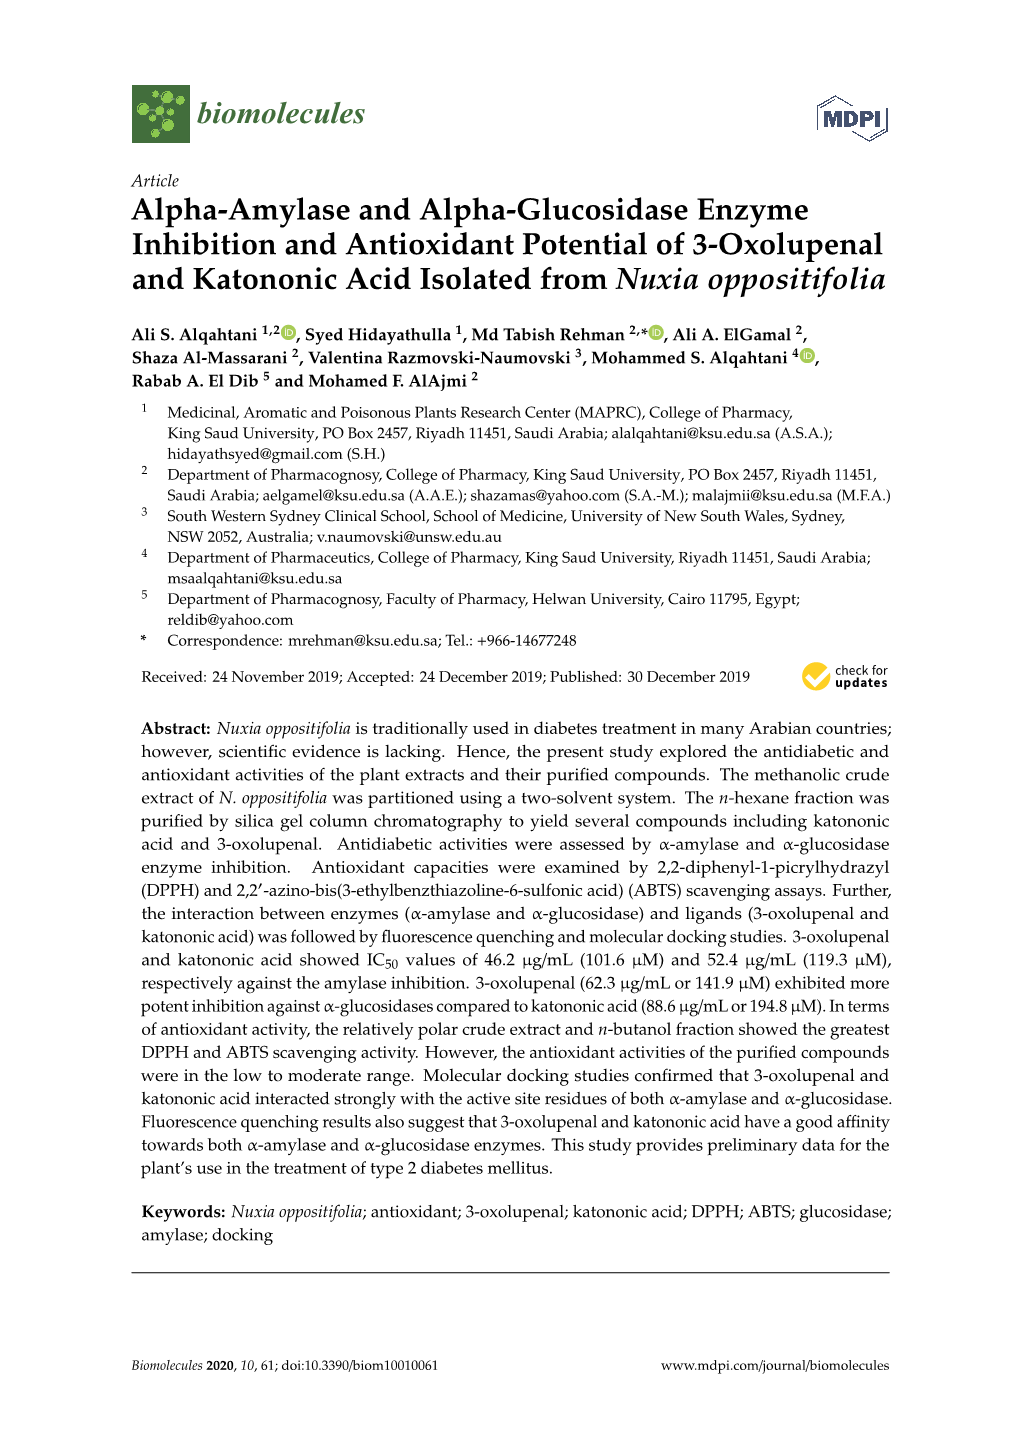 Alpha-Amylase and Alpha-Glucosidase Enzyme Inhibition and Antioxidant Potential of 3-Oxolupenal and Katononic Acid Isolated from Nuxia Oppositifolia